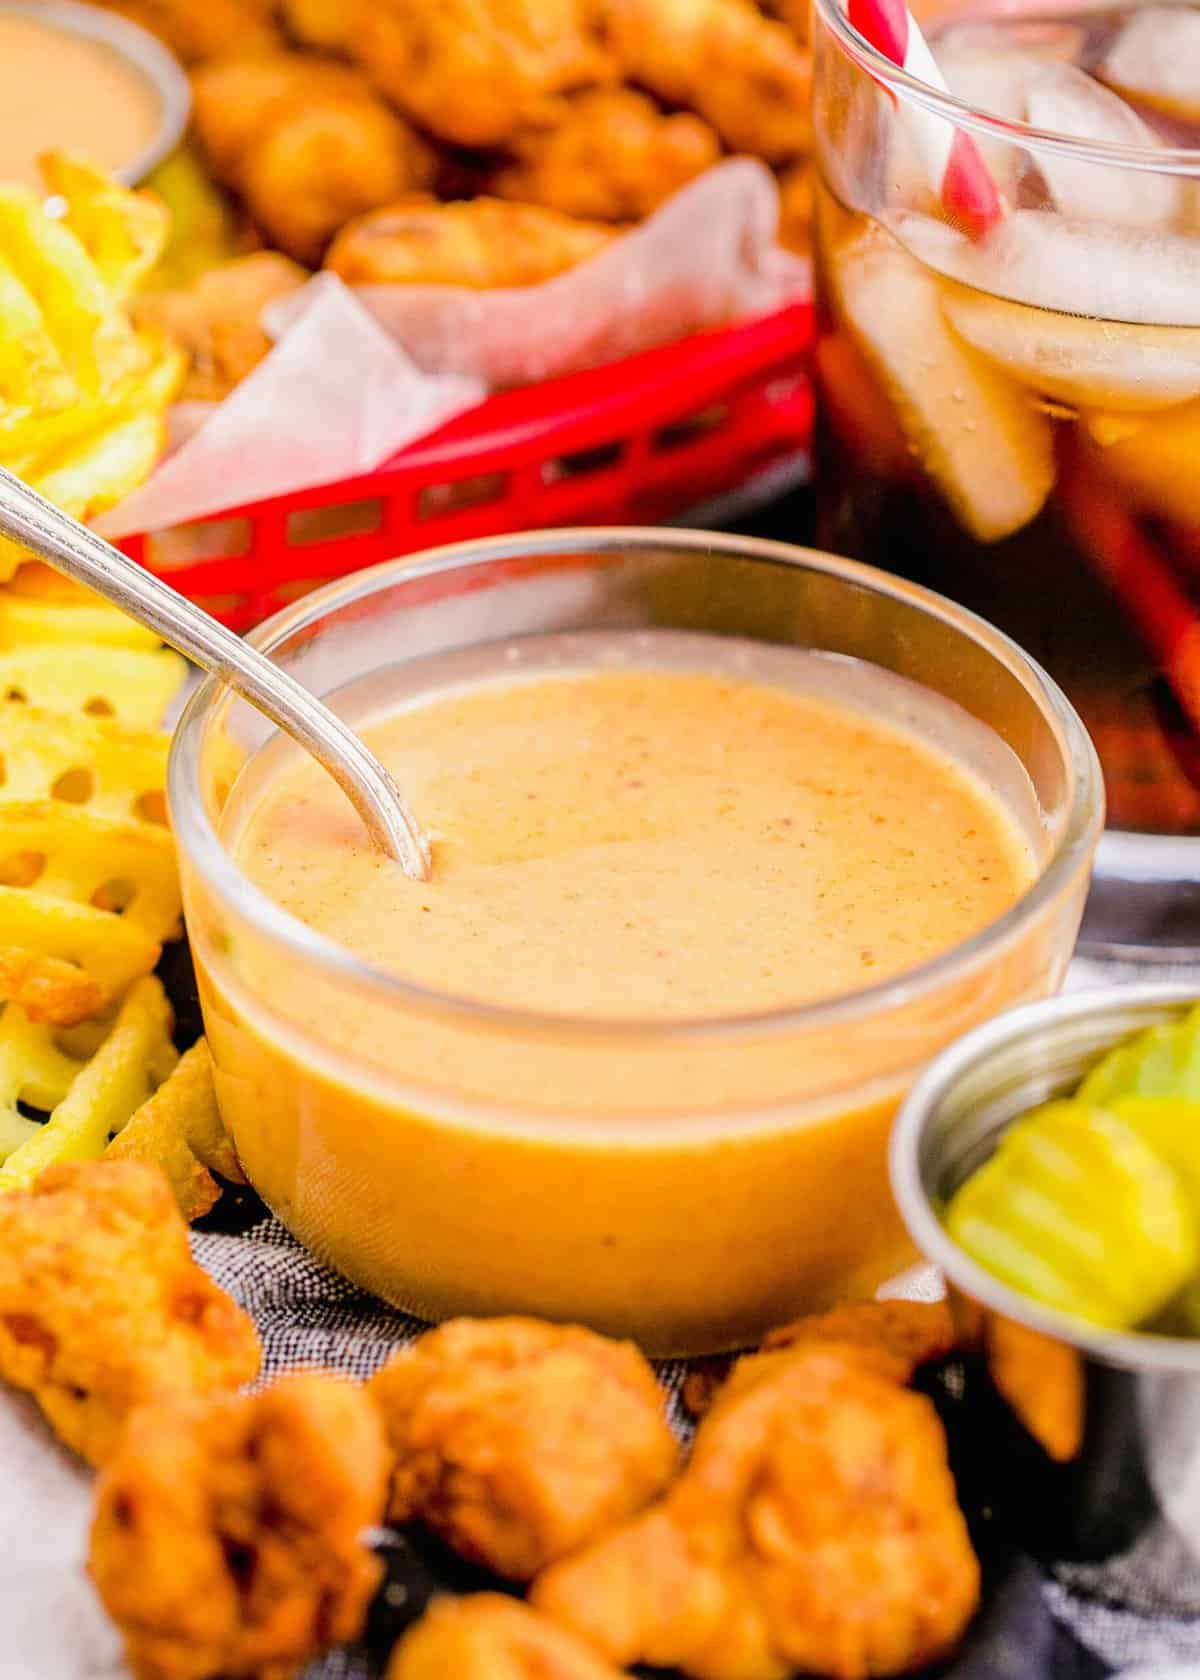 Glass bowl of Chick-Fil-A sauce, surrounded by nuggets and fries